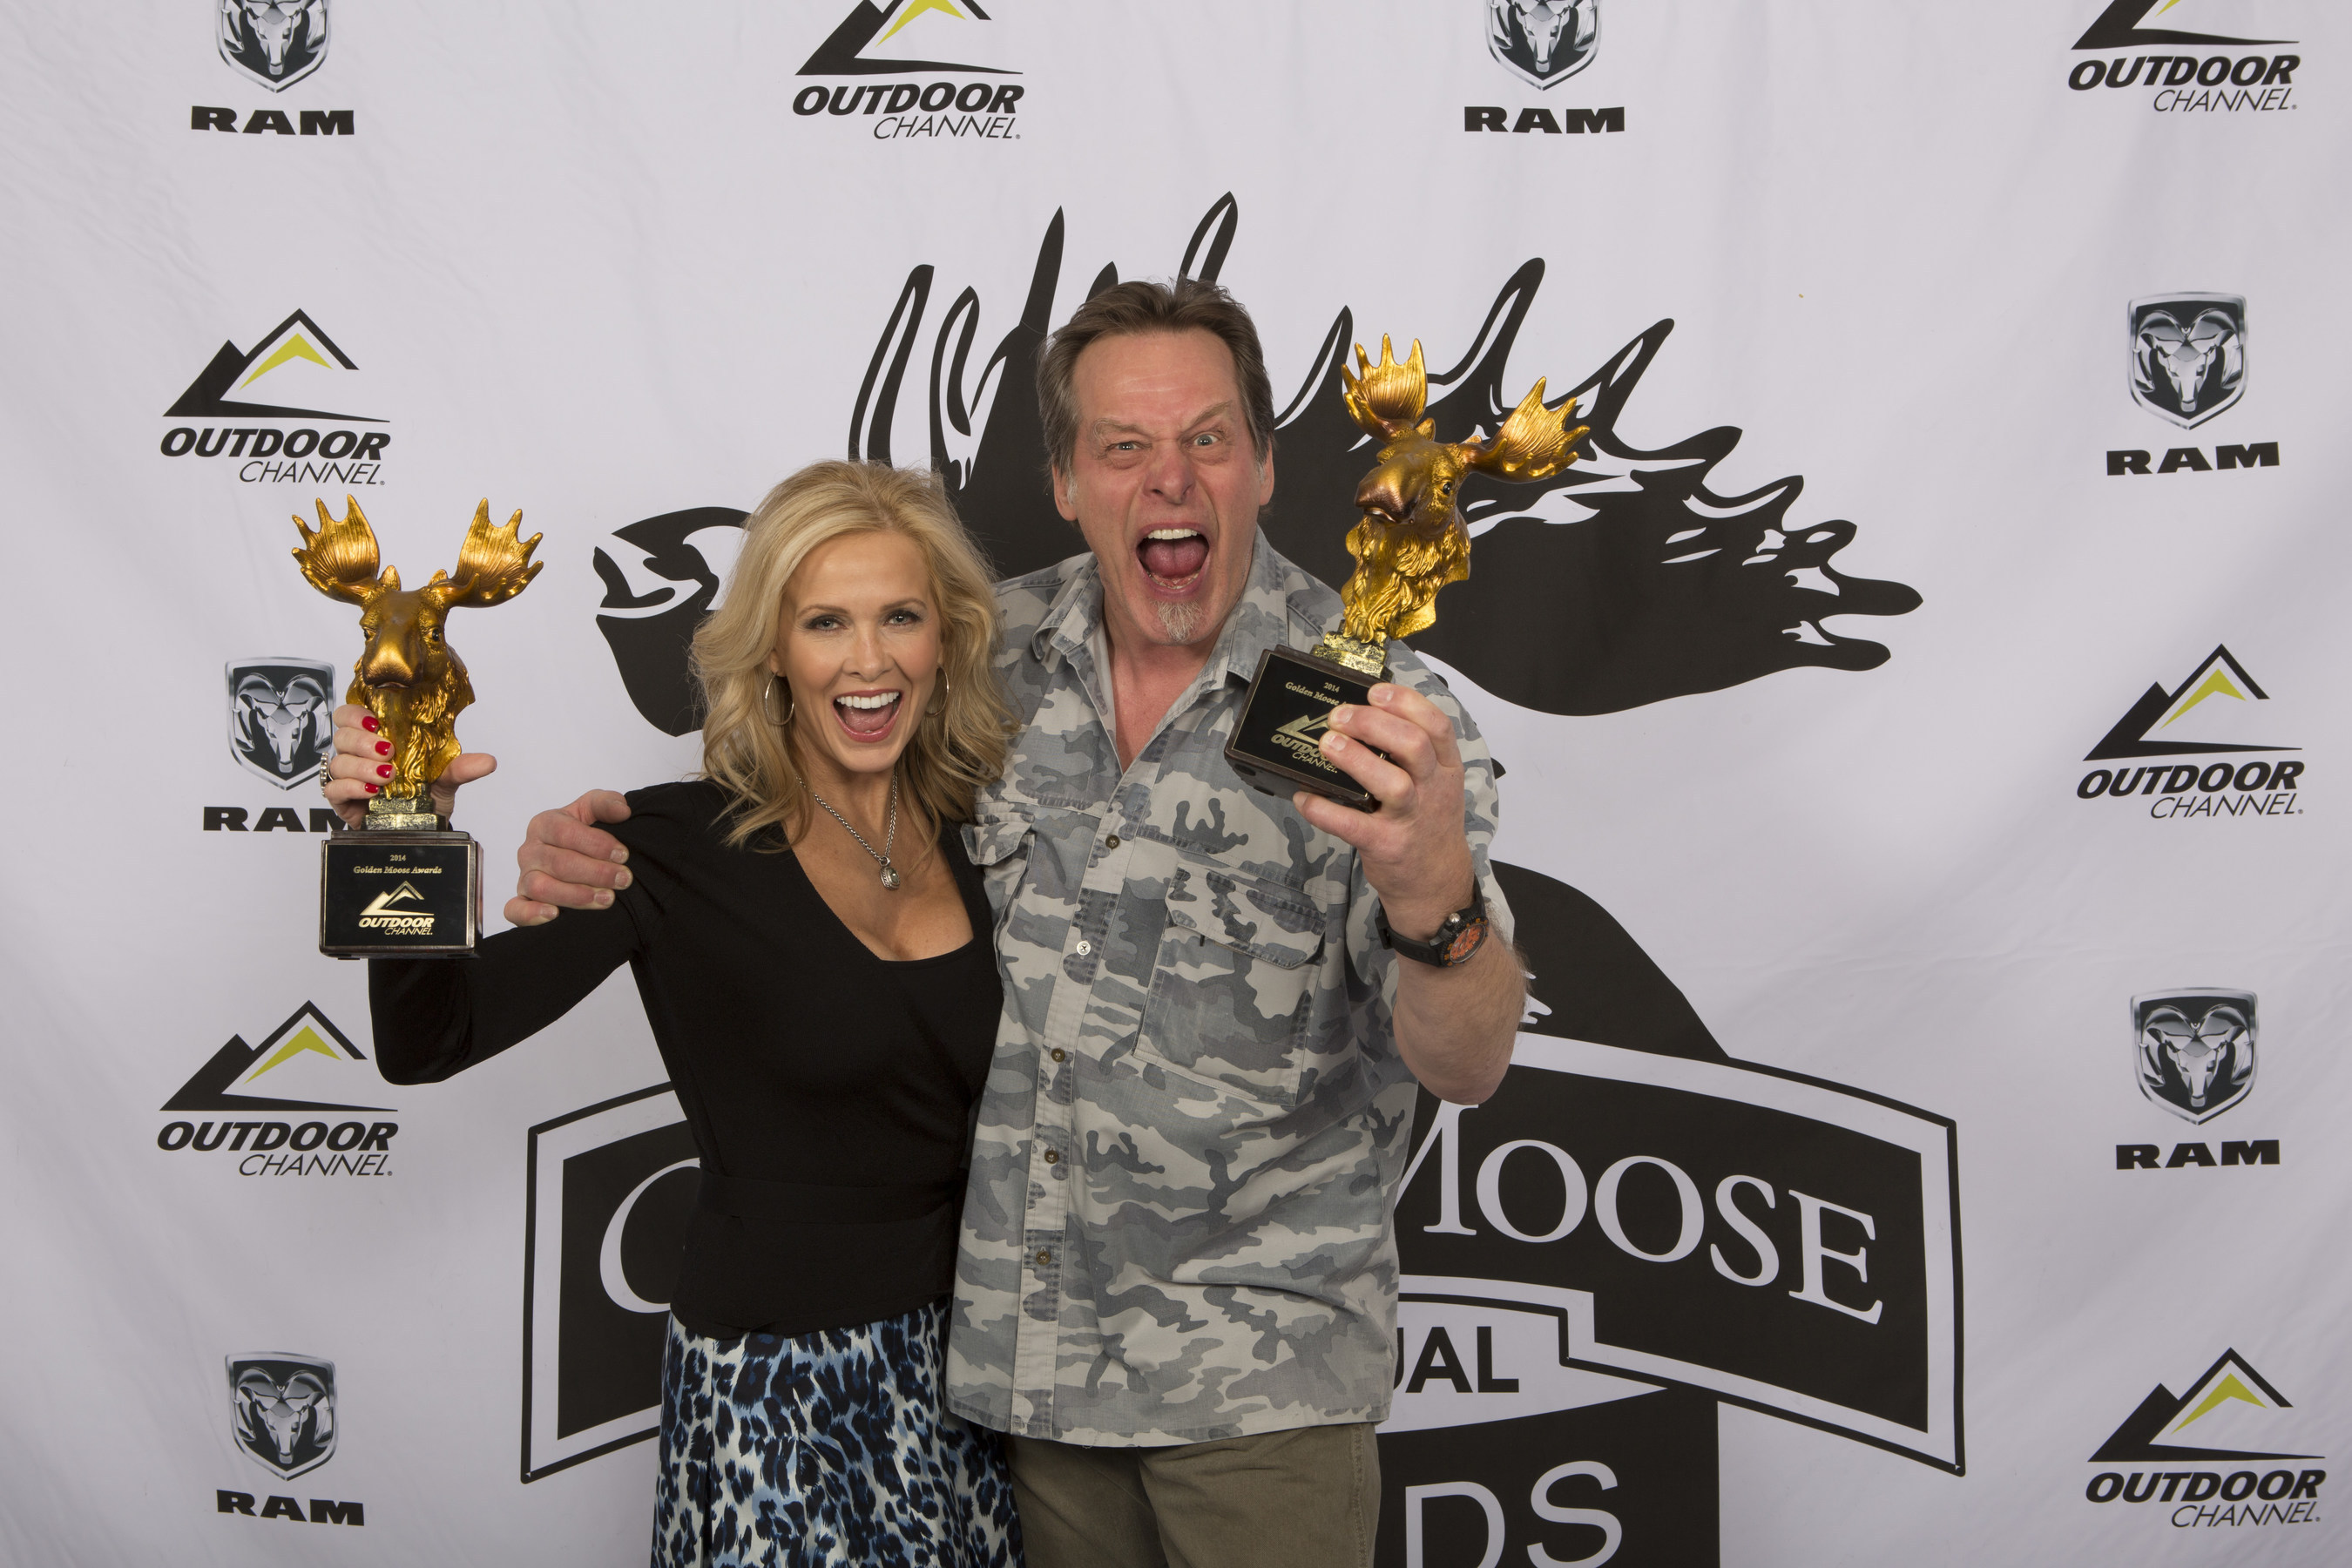 Ted and Shemane Nugent from "Ted Nugent Spirit of the Wild" on Outdoor Channel, winners of the Fan Favorite Best Host at the Golden Moose Awards.